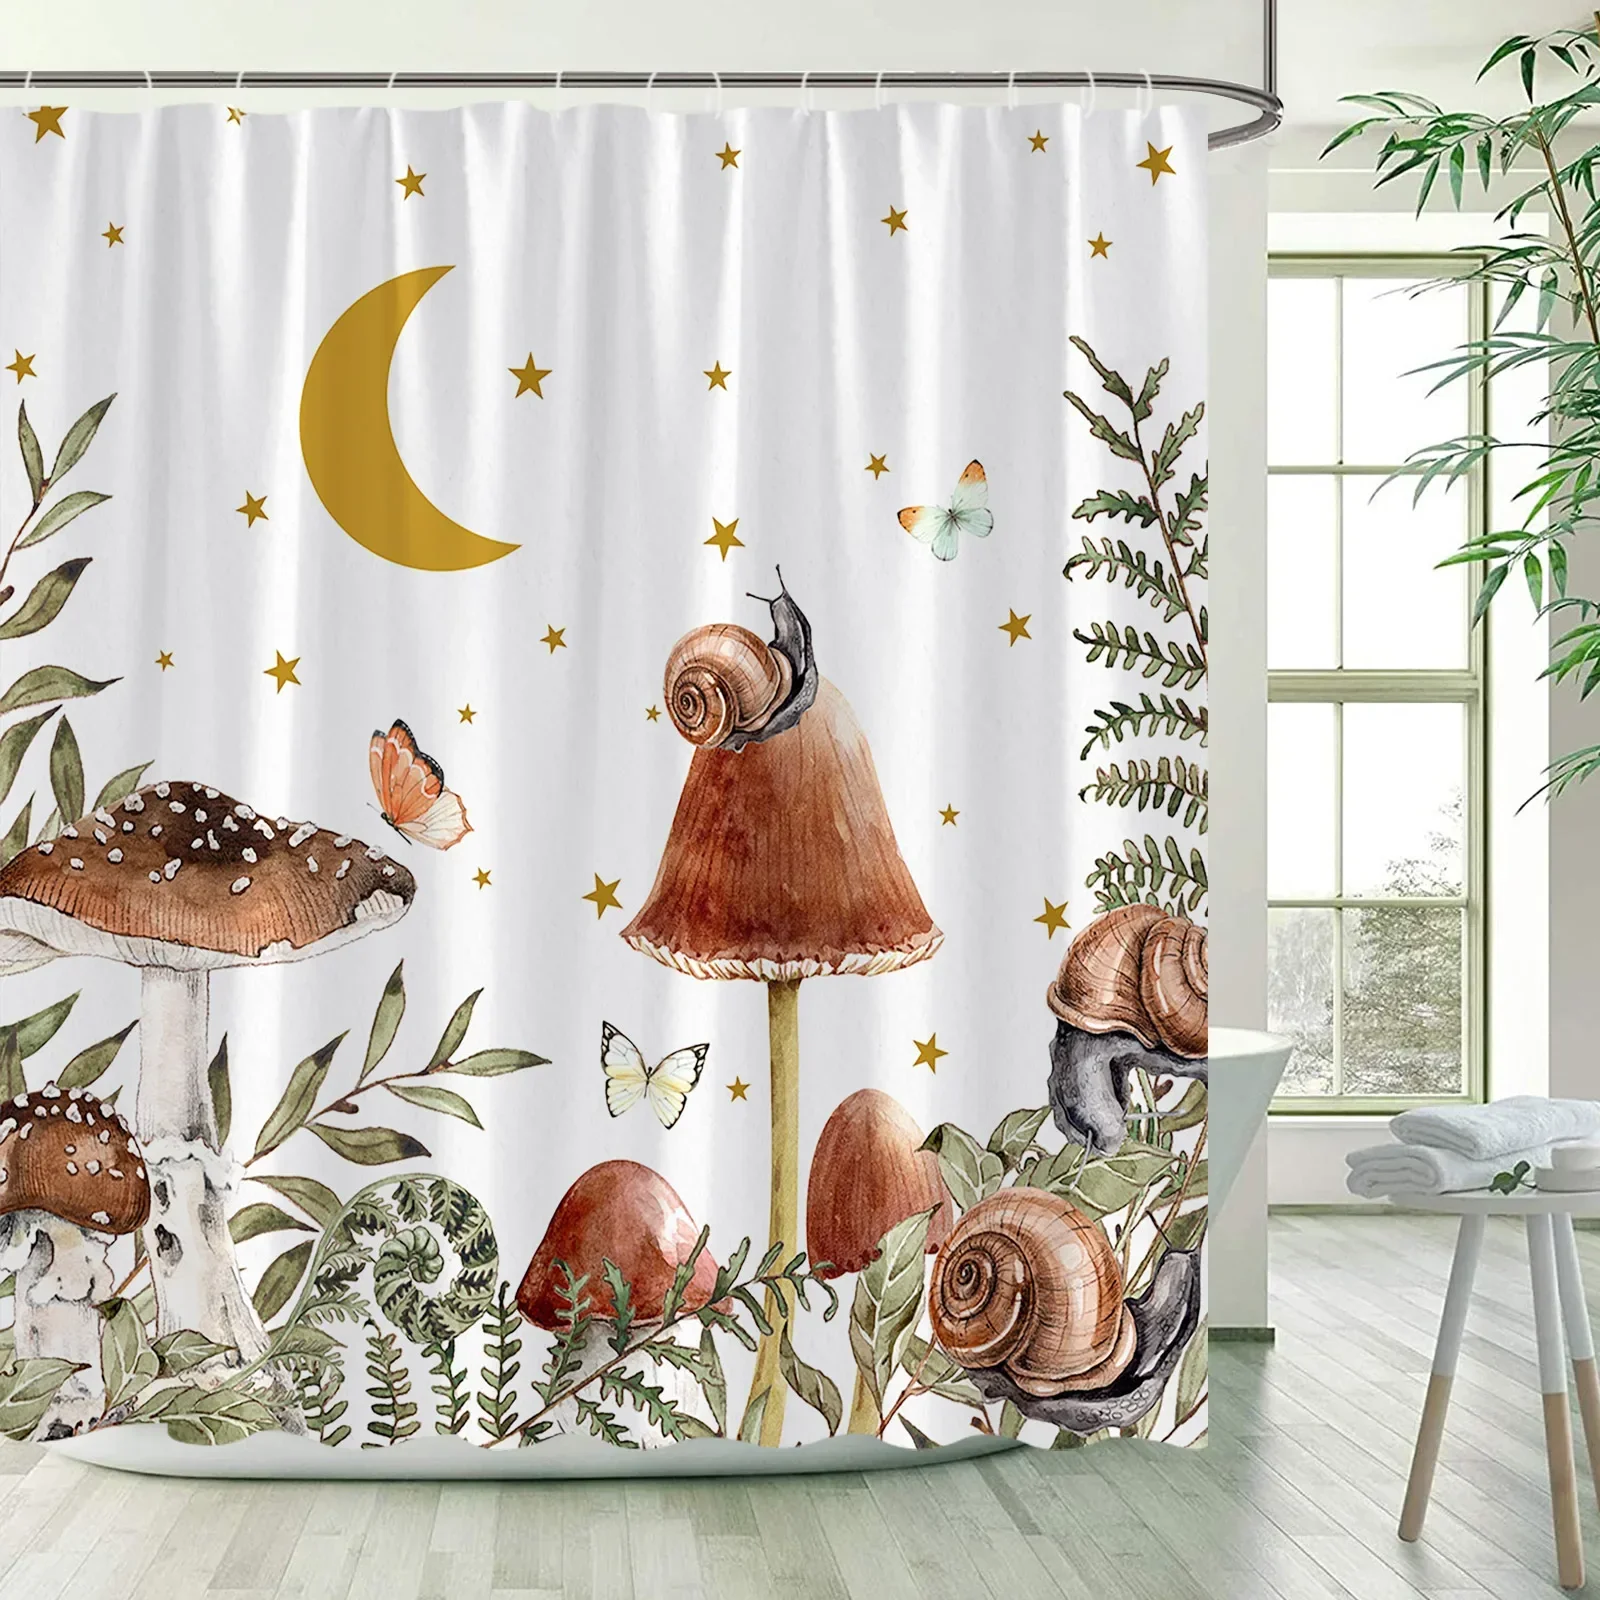 

Forest Mushroom Shower Curtain Moon Butterfly Watercolor Plant Leaves Snail Cartoon Children Bathroom Decor Curtains with Hooks